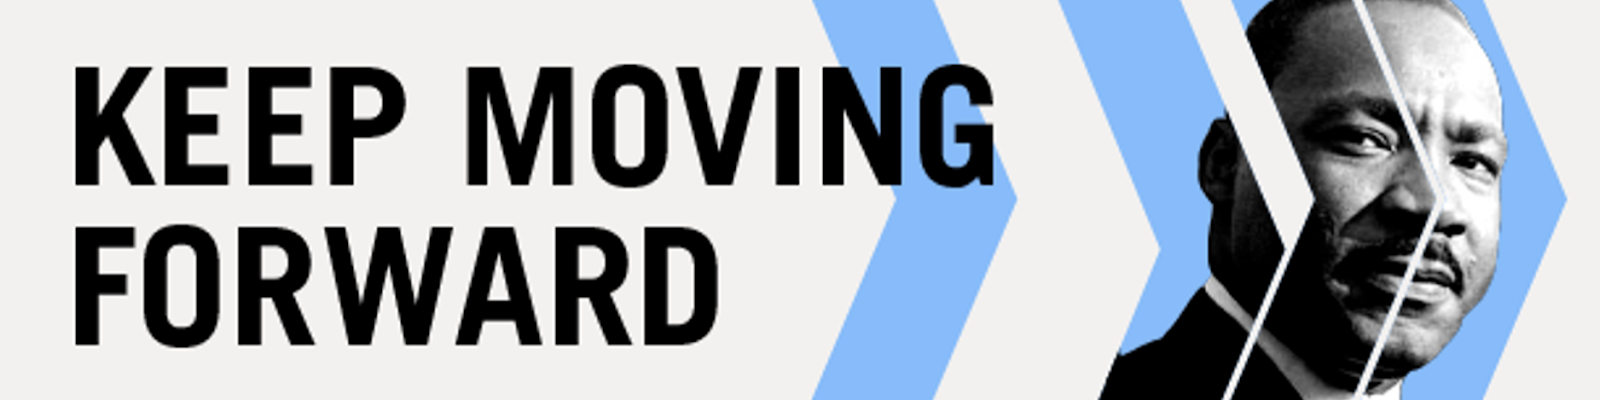 Keep Moving Forward banner with image of Martin Luther King and chevrons of blue and grey pointing right